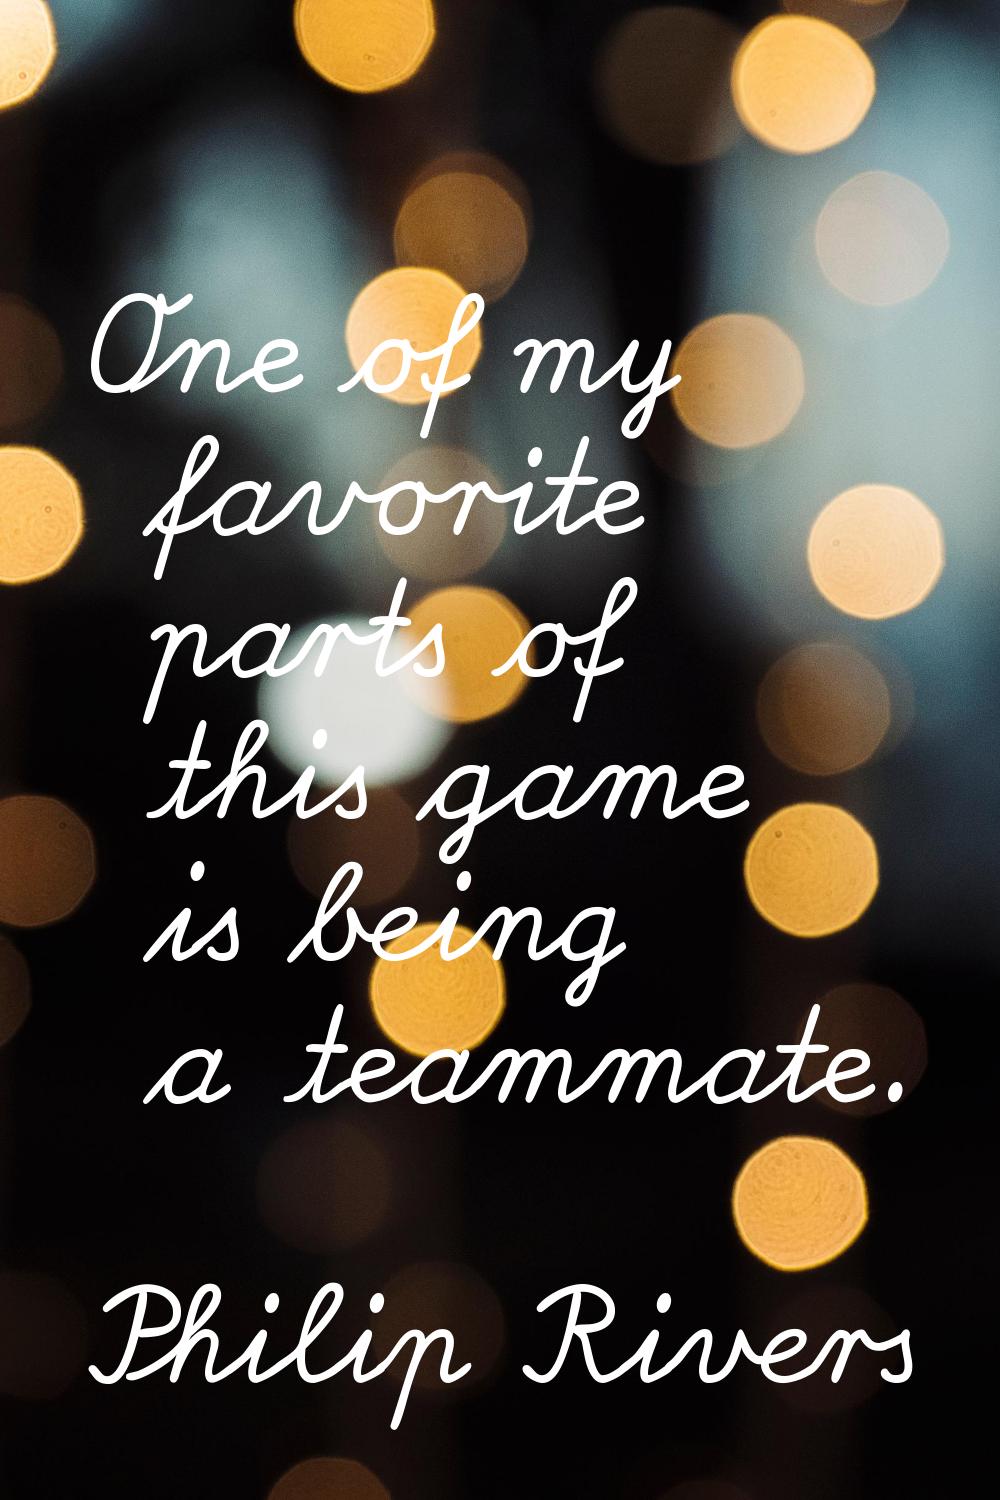 One of my favorite parts of this game is being a teammate.